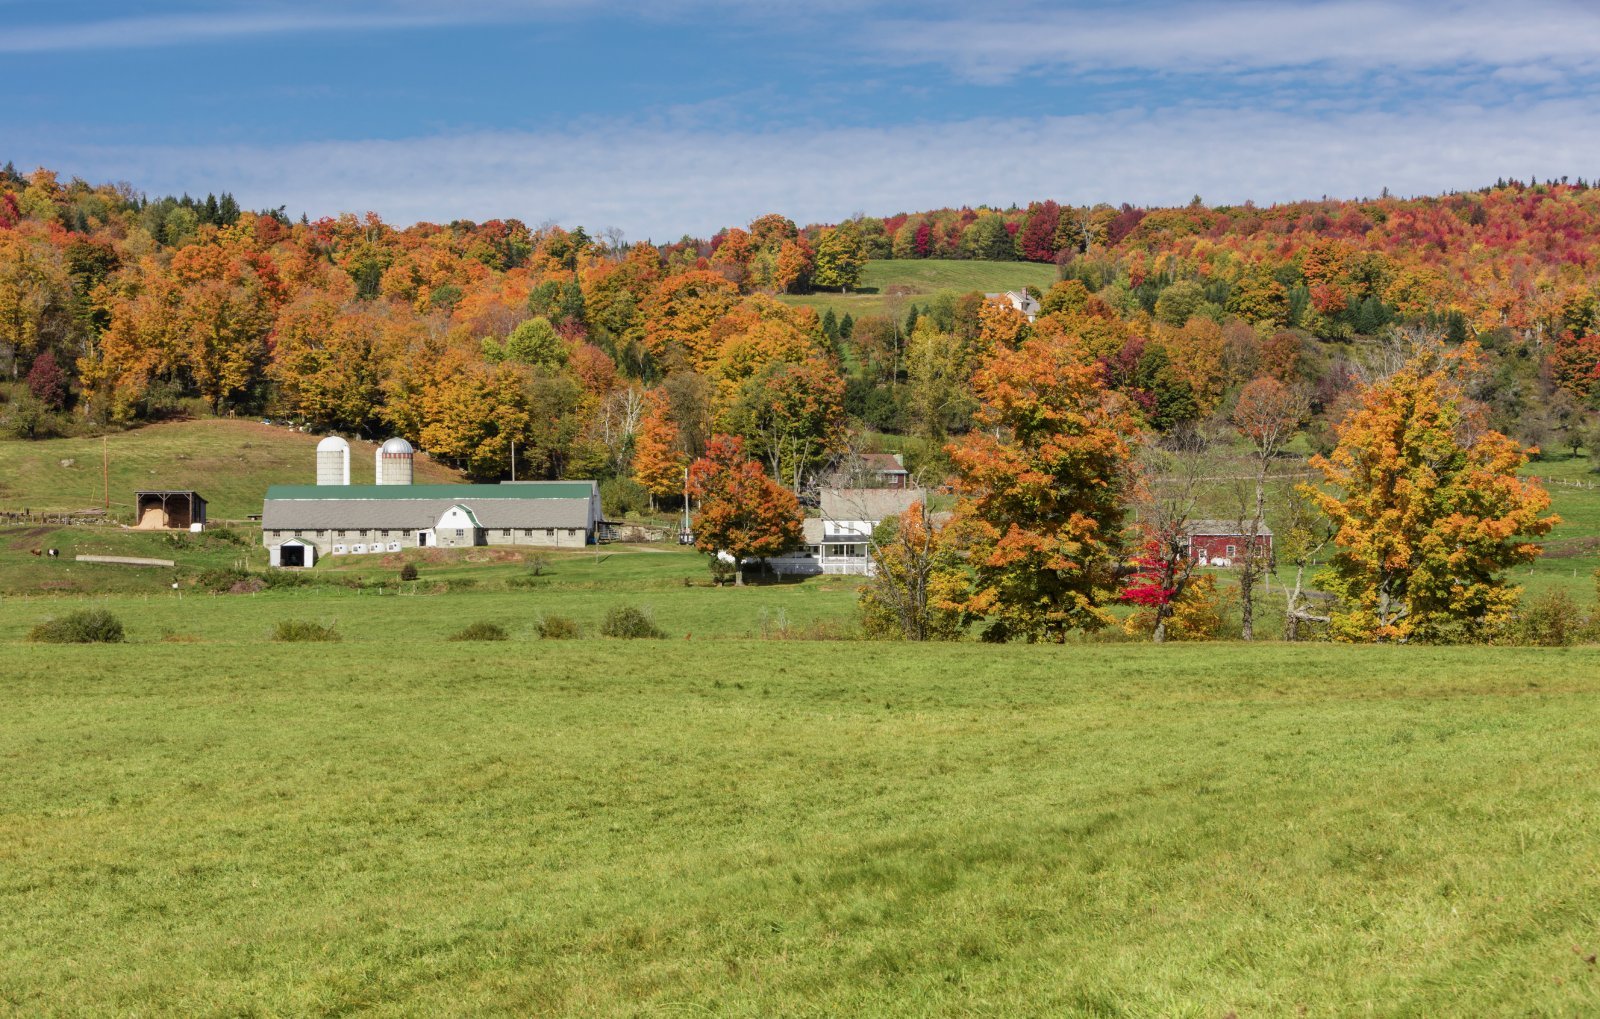 <p class="wp-caption-text">Image Credit: Shutterstock / Nature’s Charm</p>  <p><span>Environmental advocate, introspective, and a bit of an old soul. If you’re passionate about conservation, enjoy quiet contemplation, and love the charm of small towns, Vermont’s green hills are your home.</span></p>